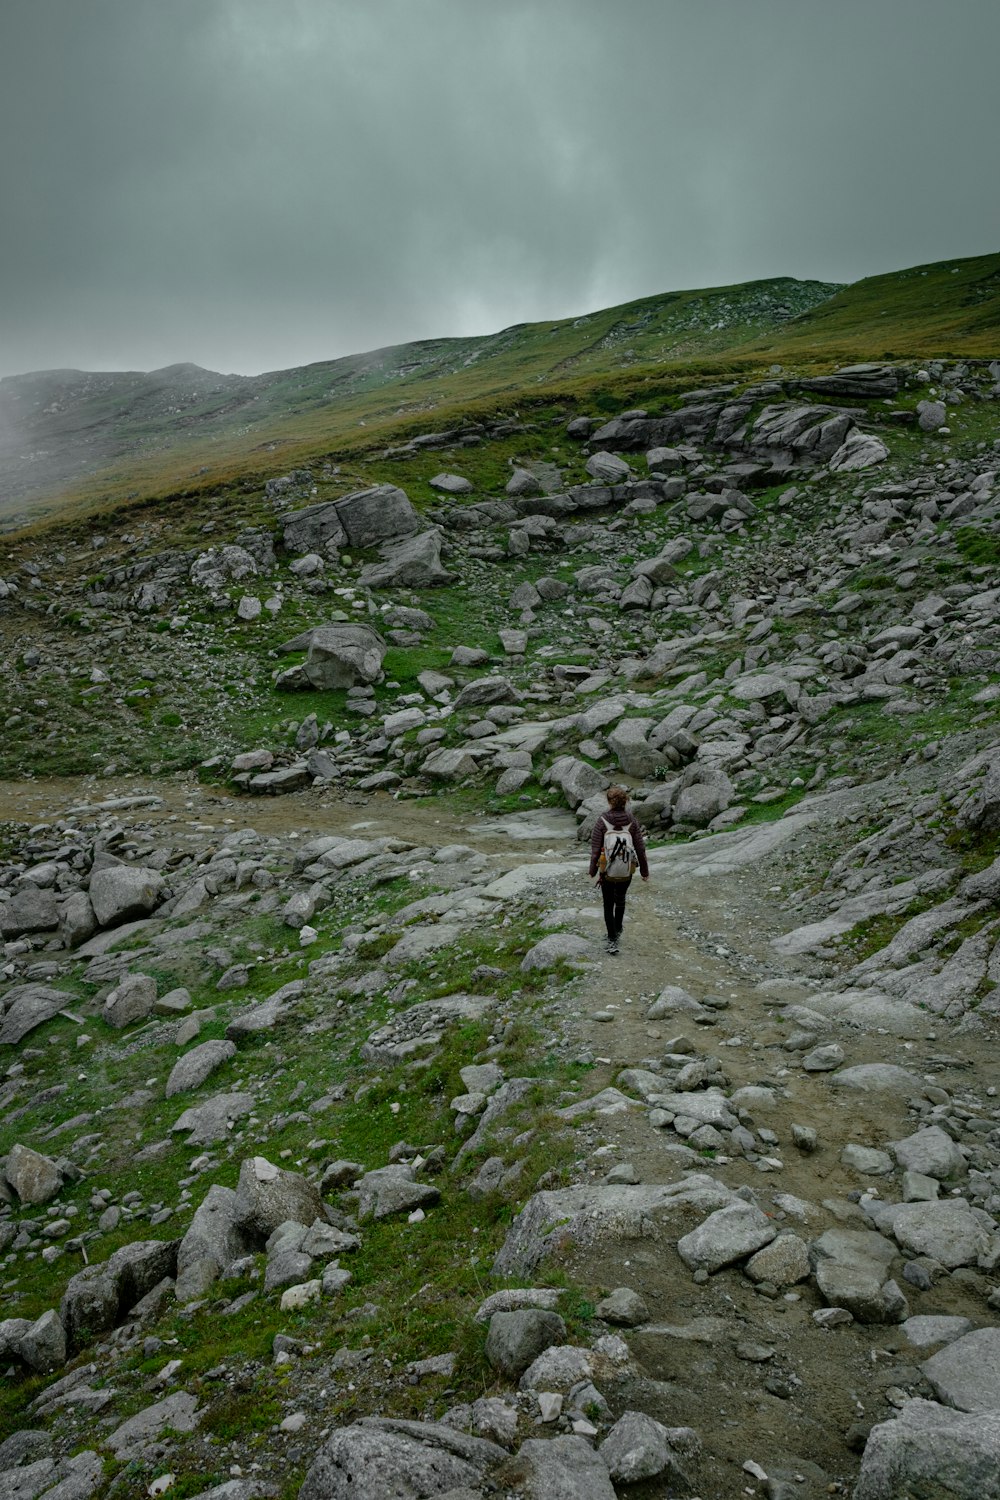 a person walking on a rocky path